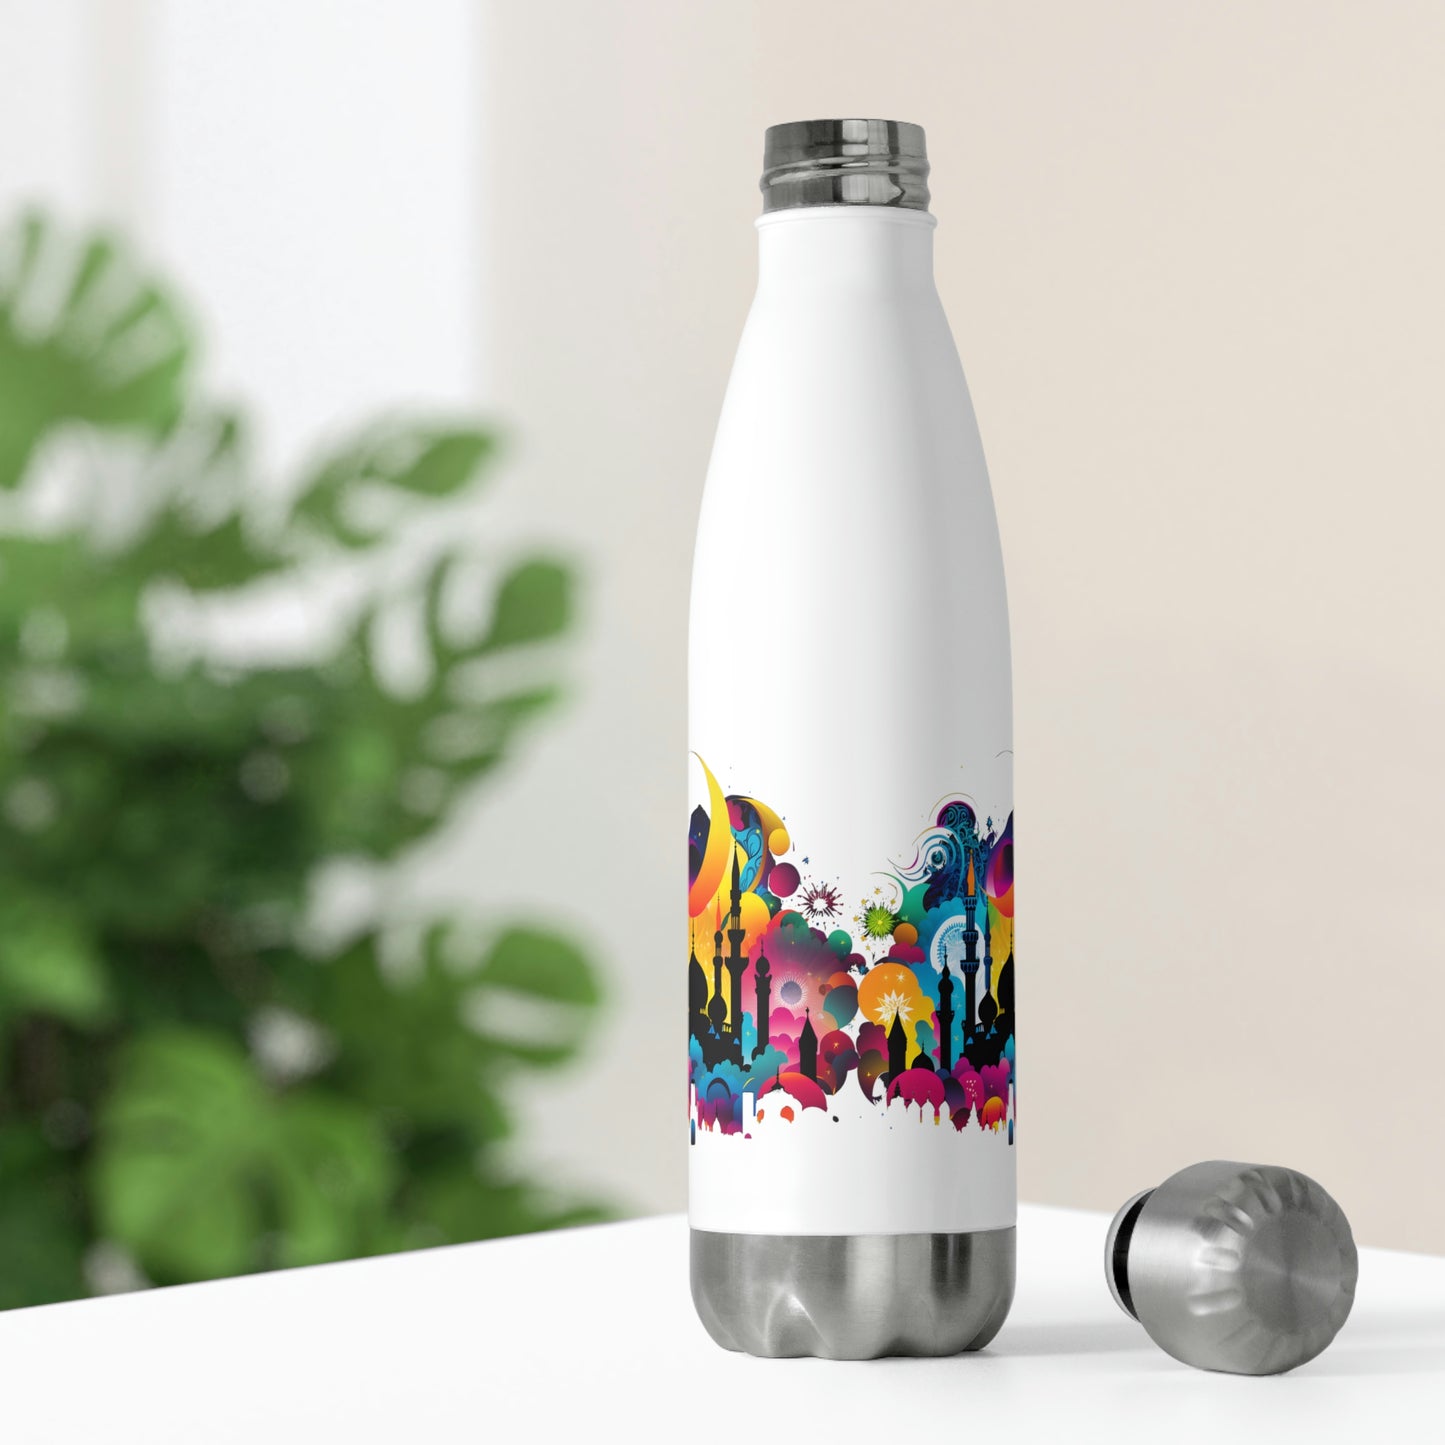 Islamic Theme water bottle Neon Dream Scape Mosque Insulated Bottle 20oz